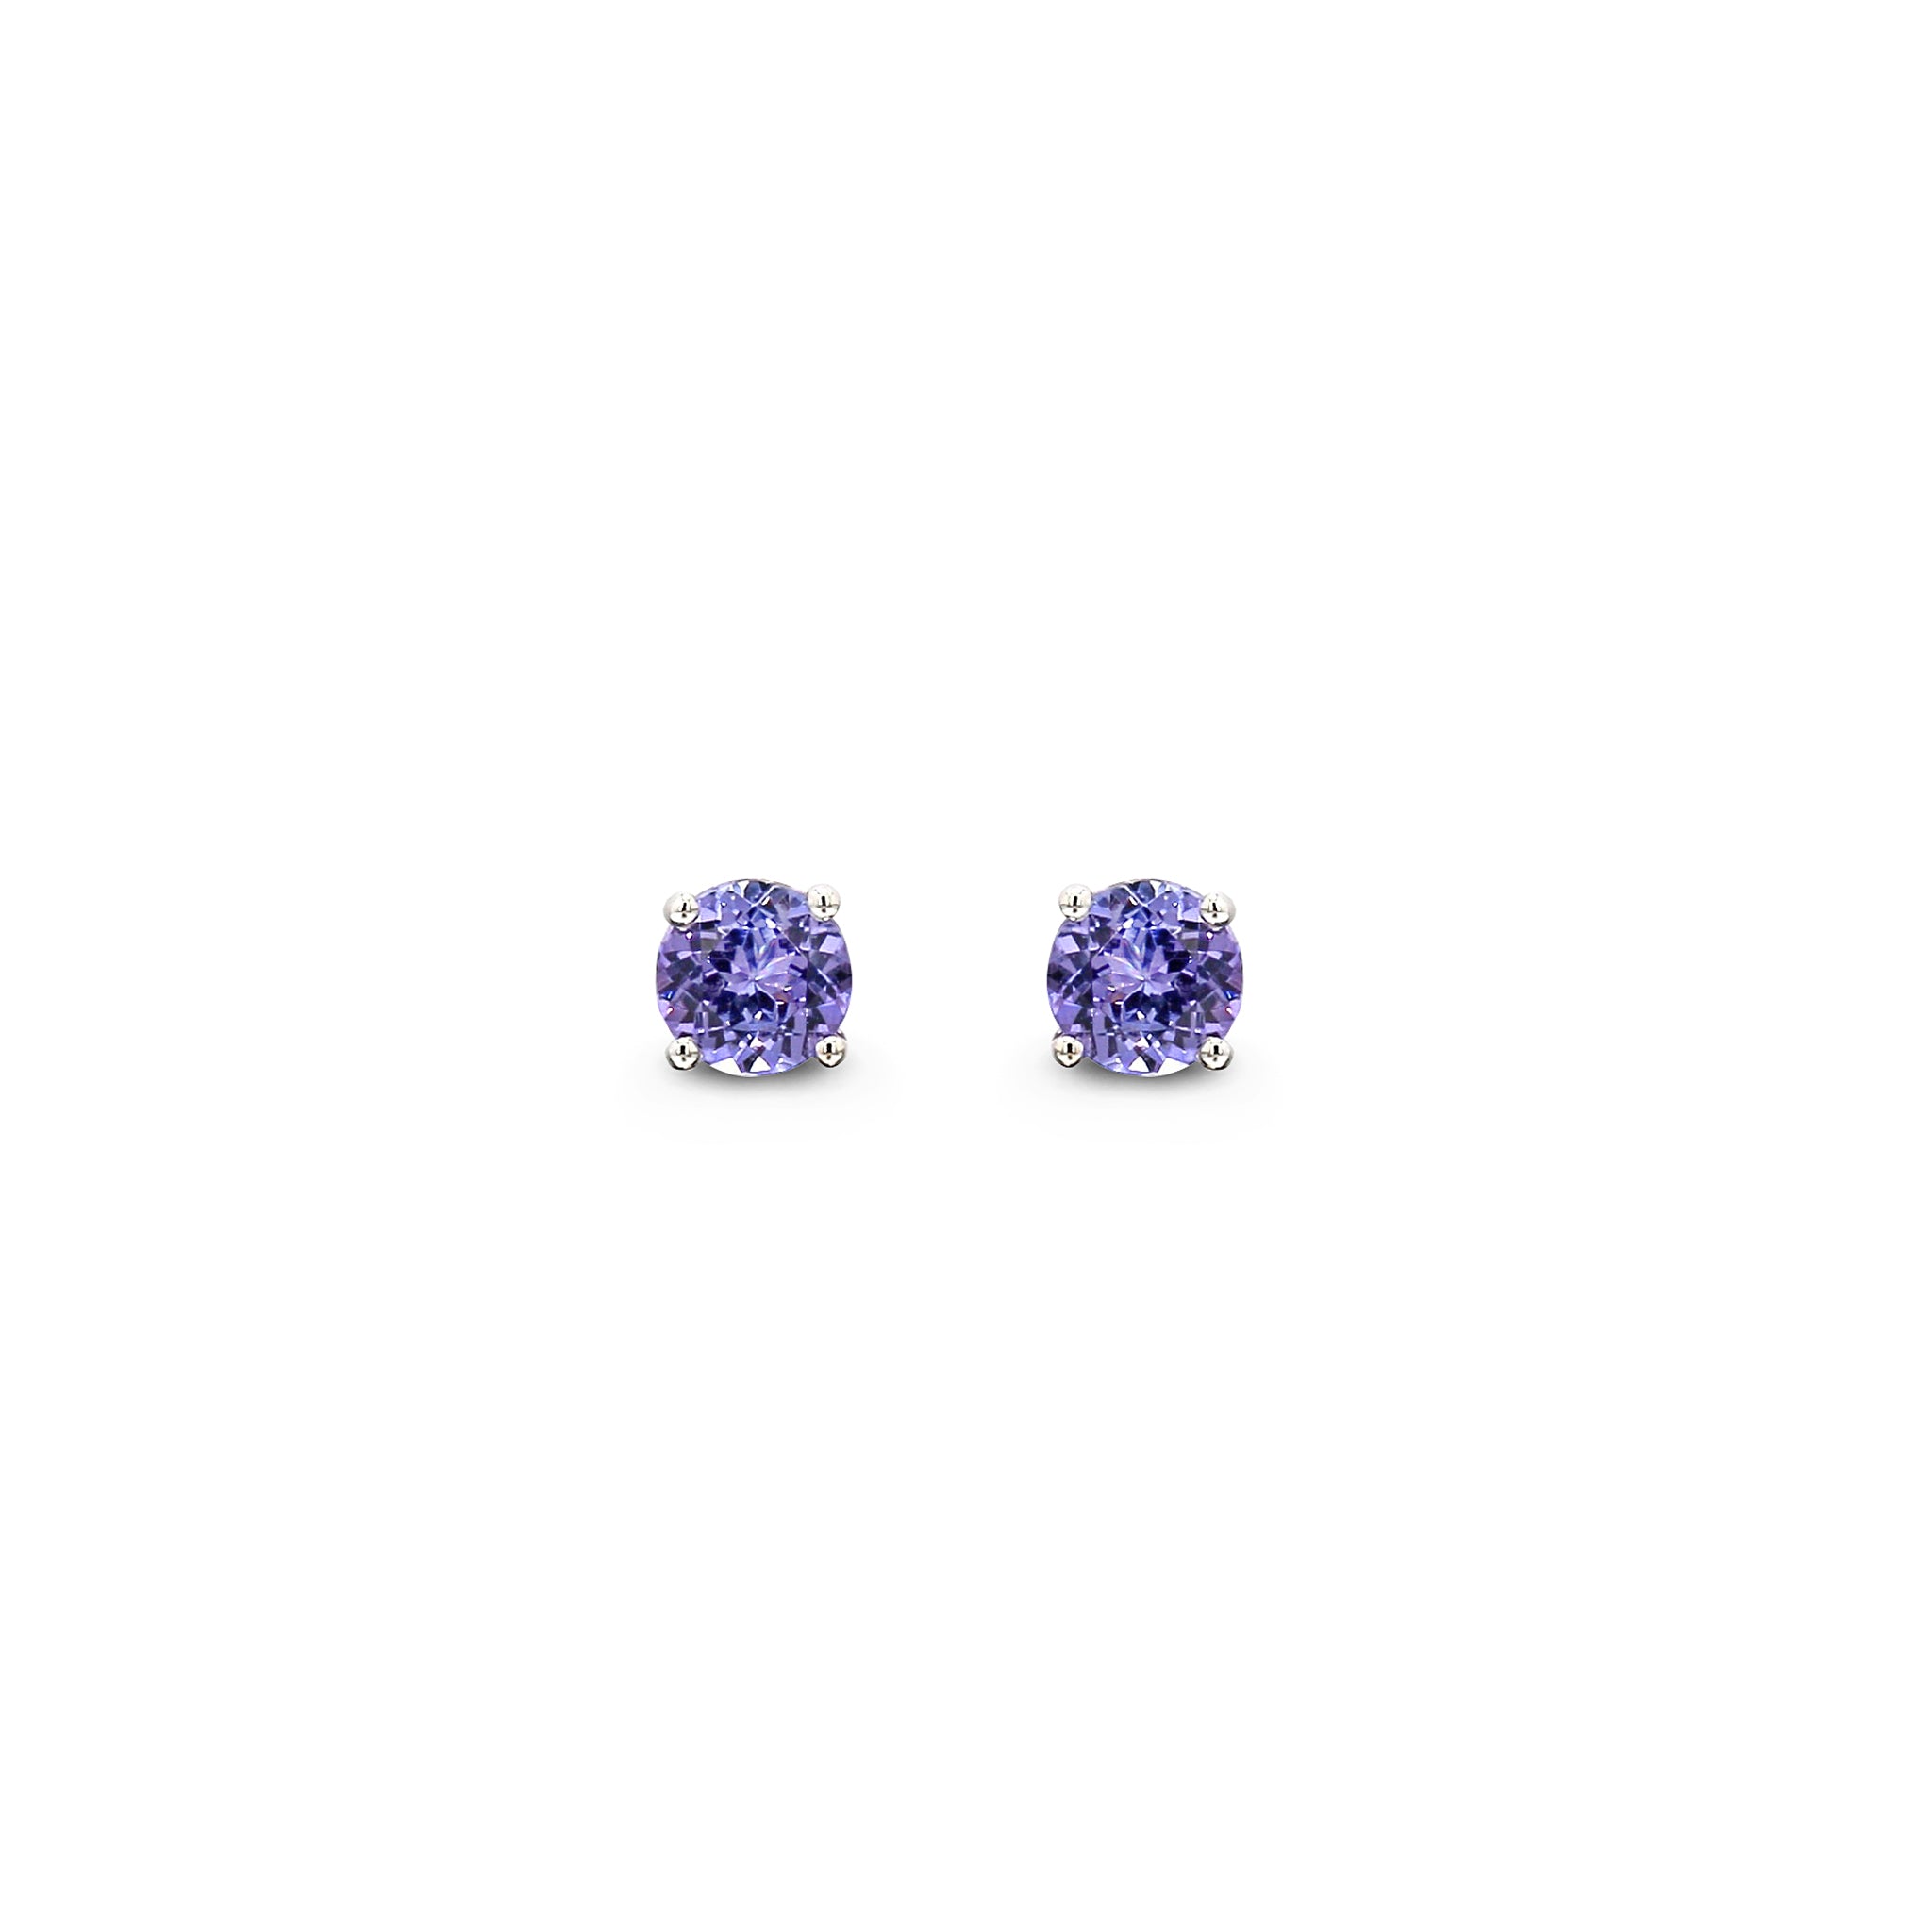 Shimansky - Tanzanite Solitaire Stud Earrings 1.00ct crafted in 14K White Gold